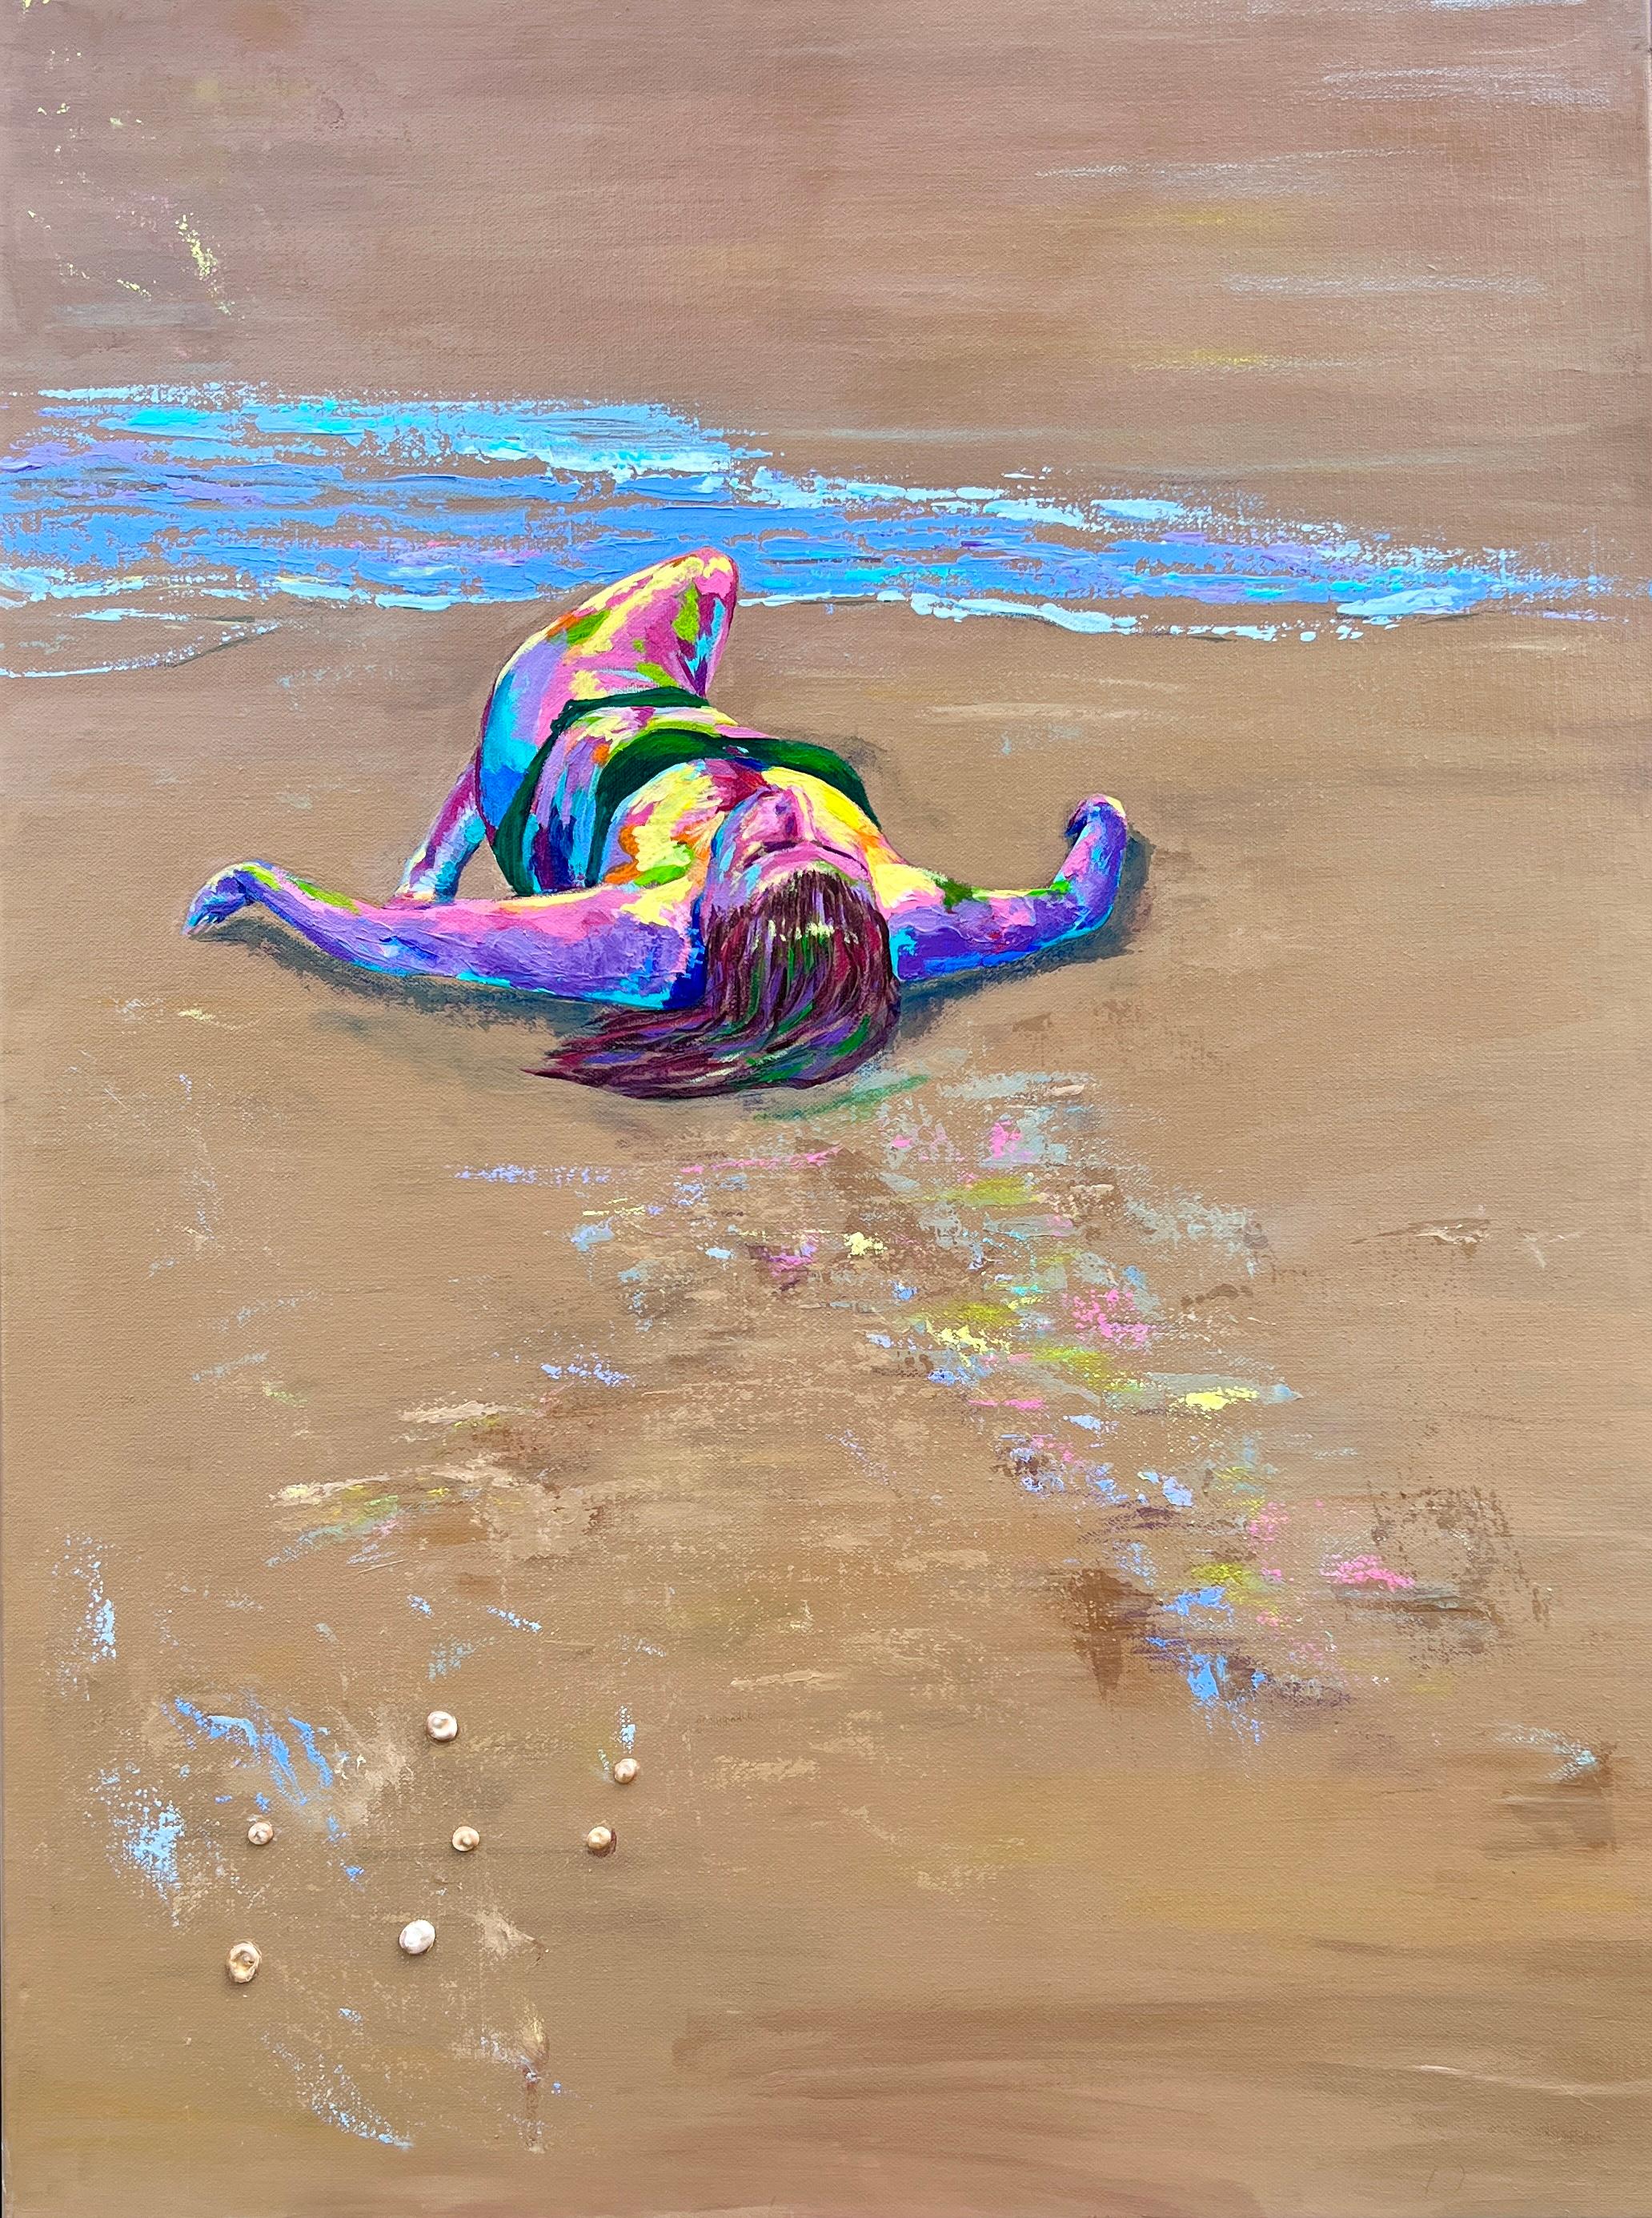 I wanna chilling on the beach - Painting by Lana Ritter